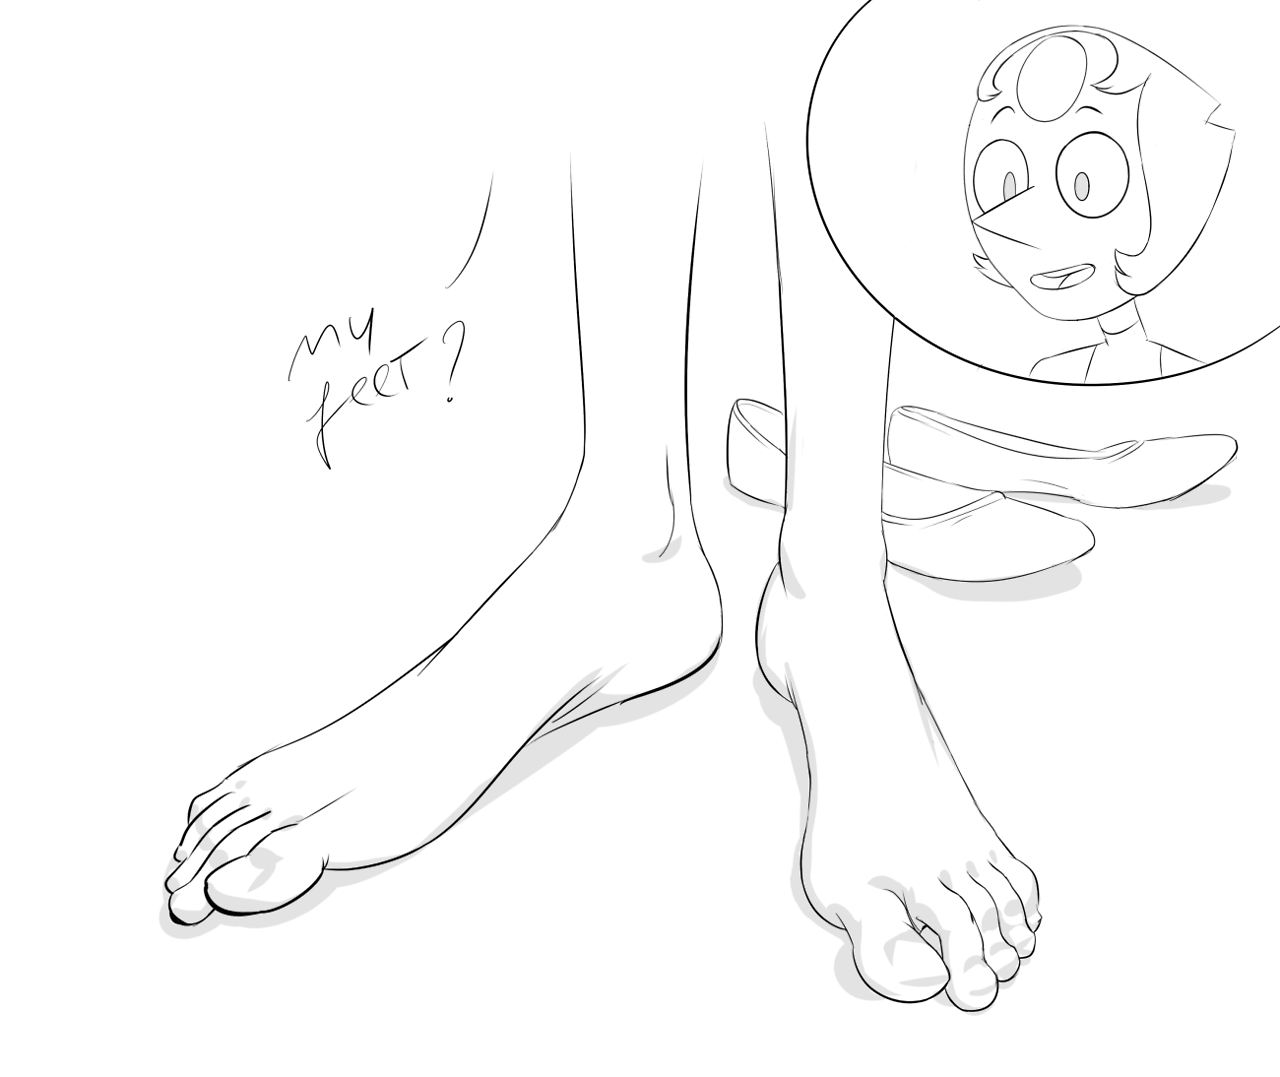 Steven Universe - PearlÂ´s Feet - Page 2 - IMHentai